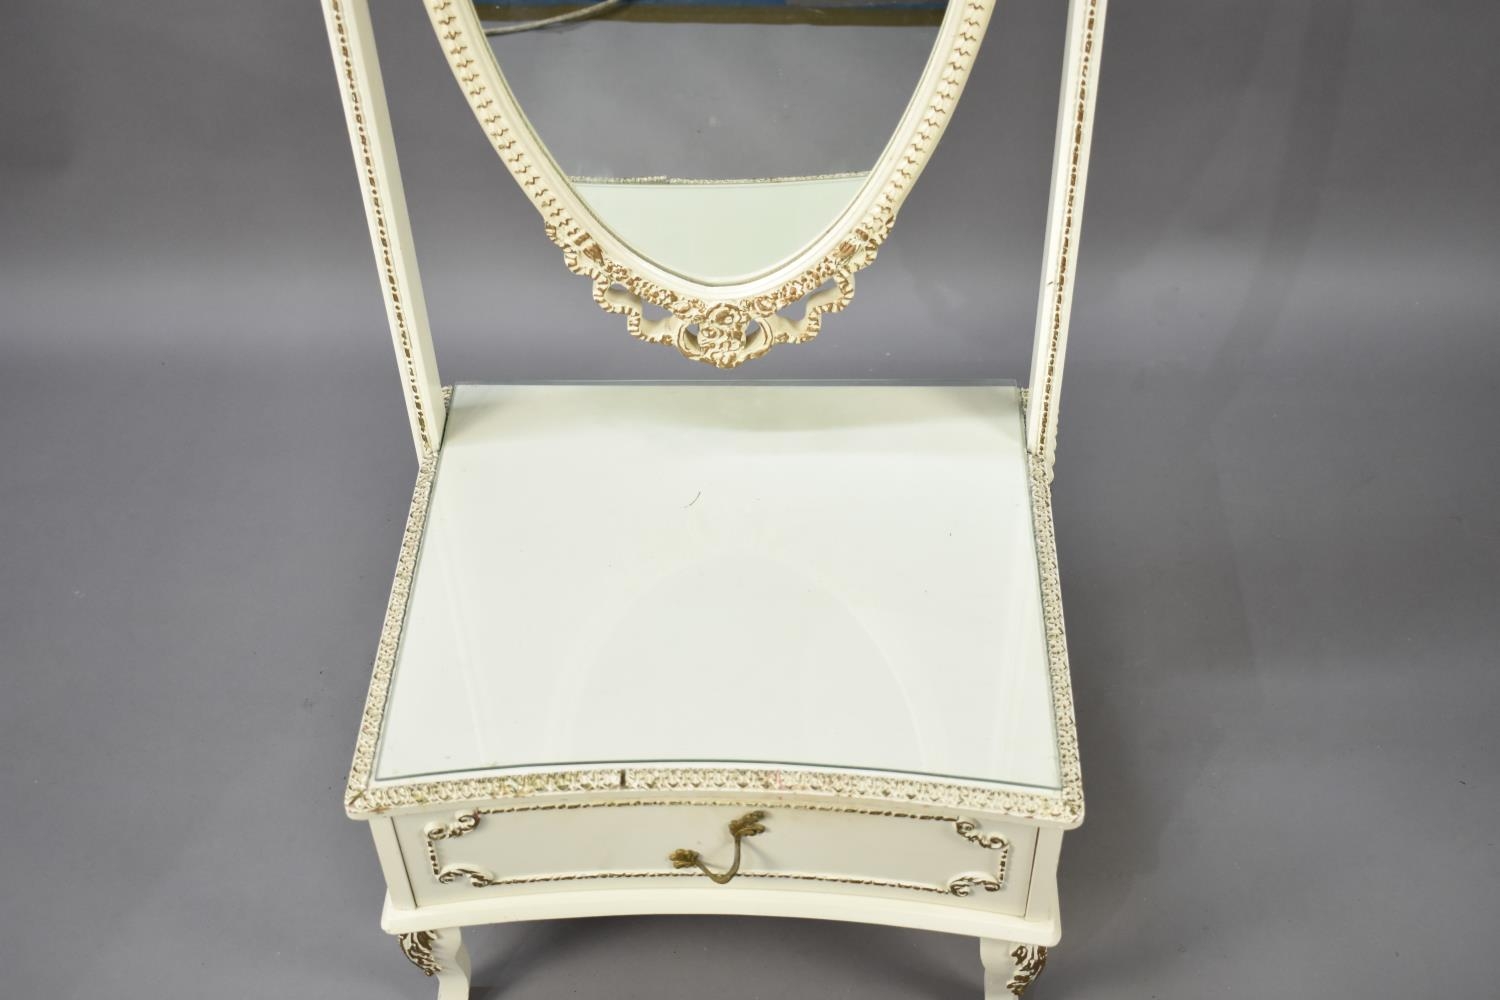 A Mid 20th Century Cream and Gilt Cheval Dressing Mirror with Base Drawer - Image 2 of 2